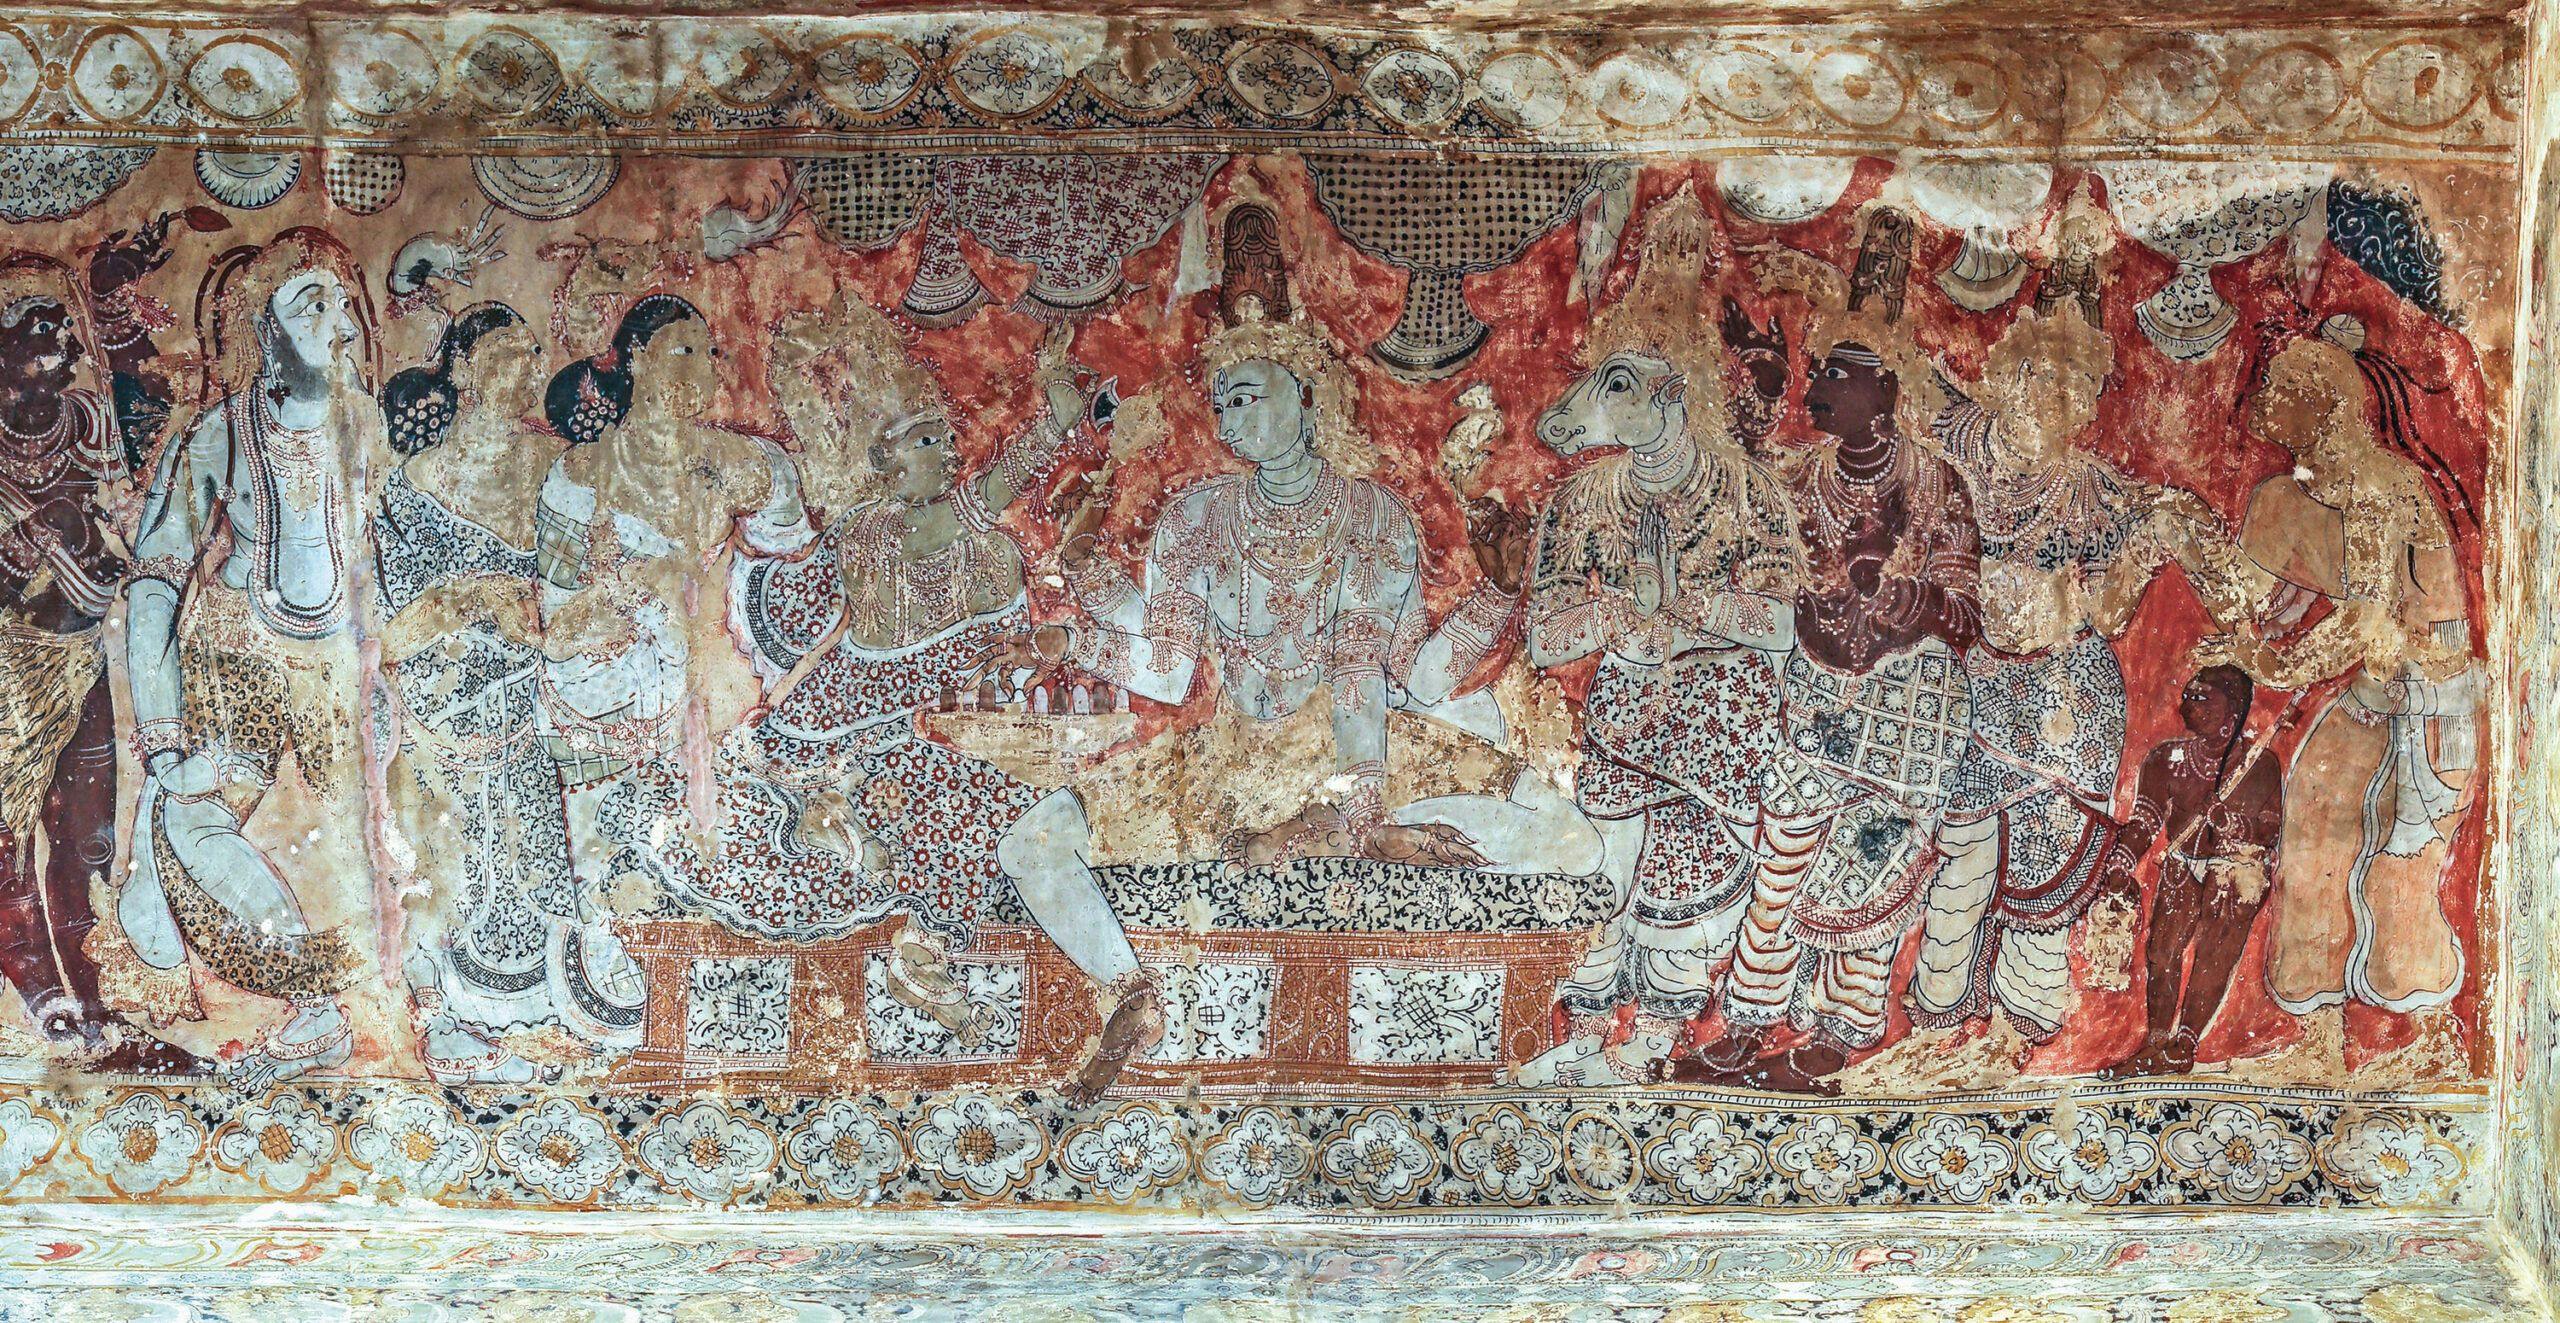 Panel A9, Scene 3, detail of 'Shiva and Parvati playing dice'